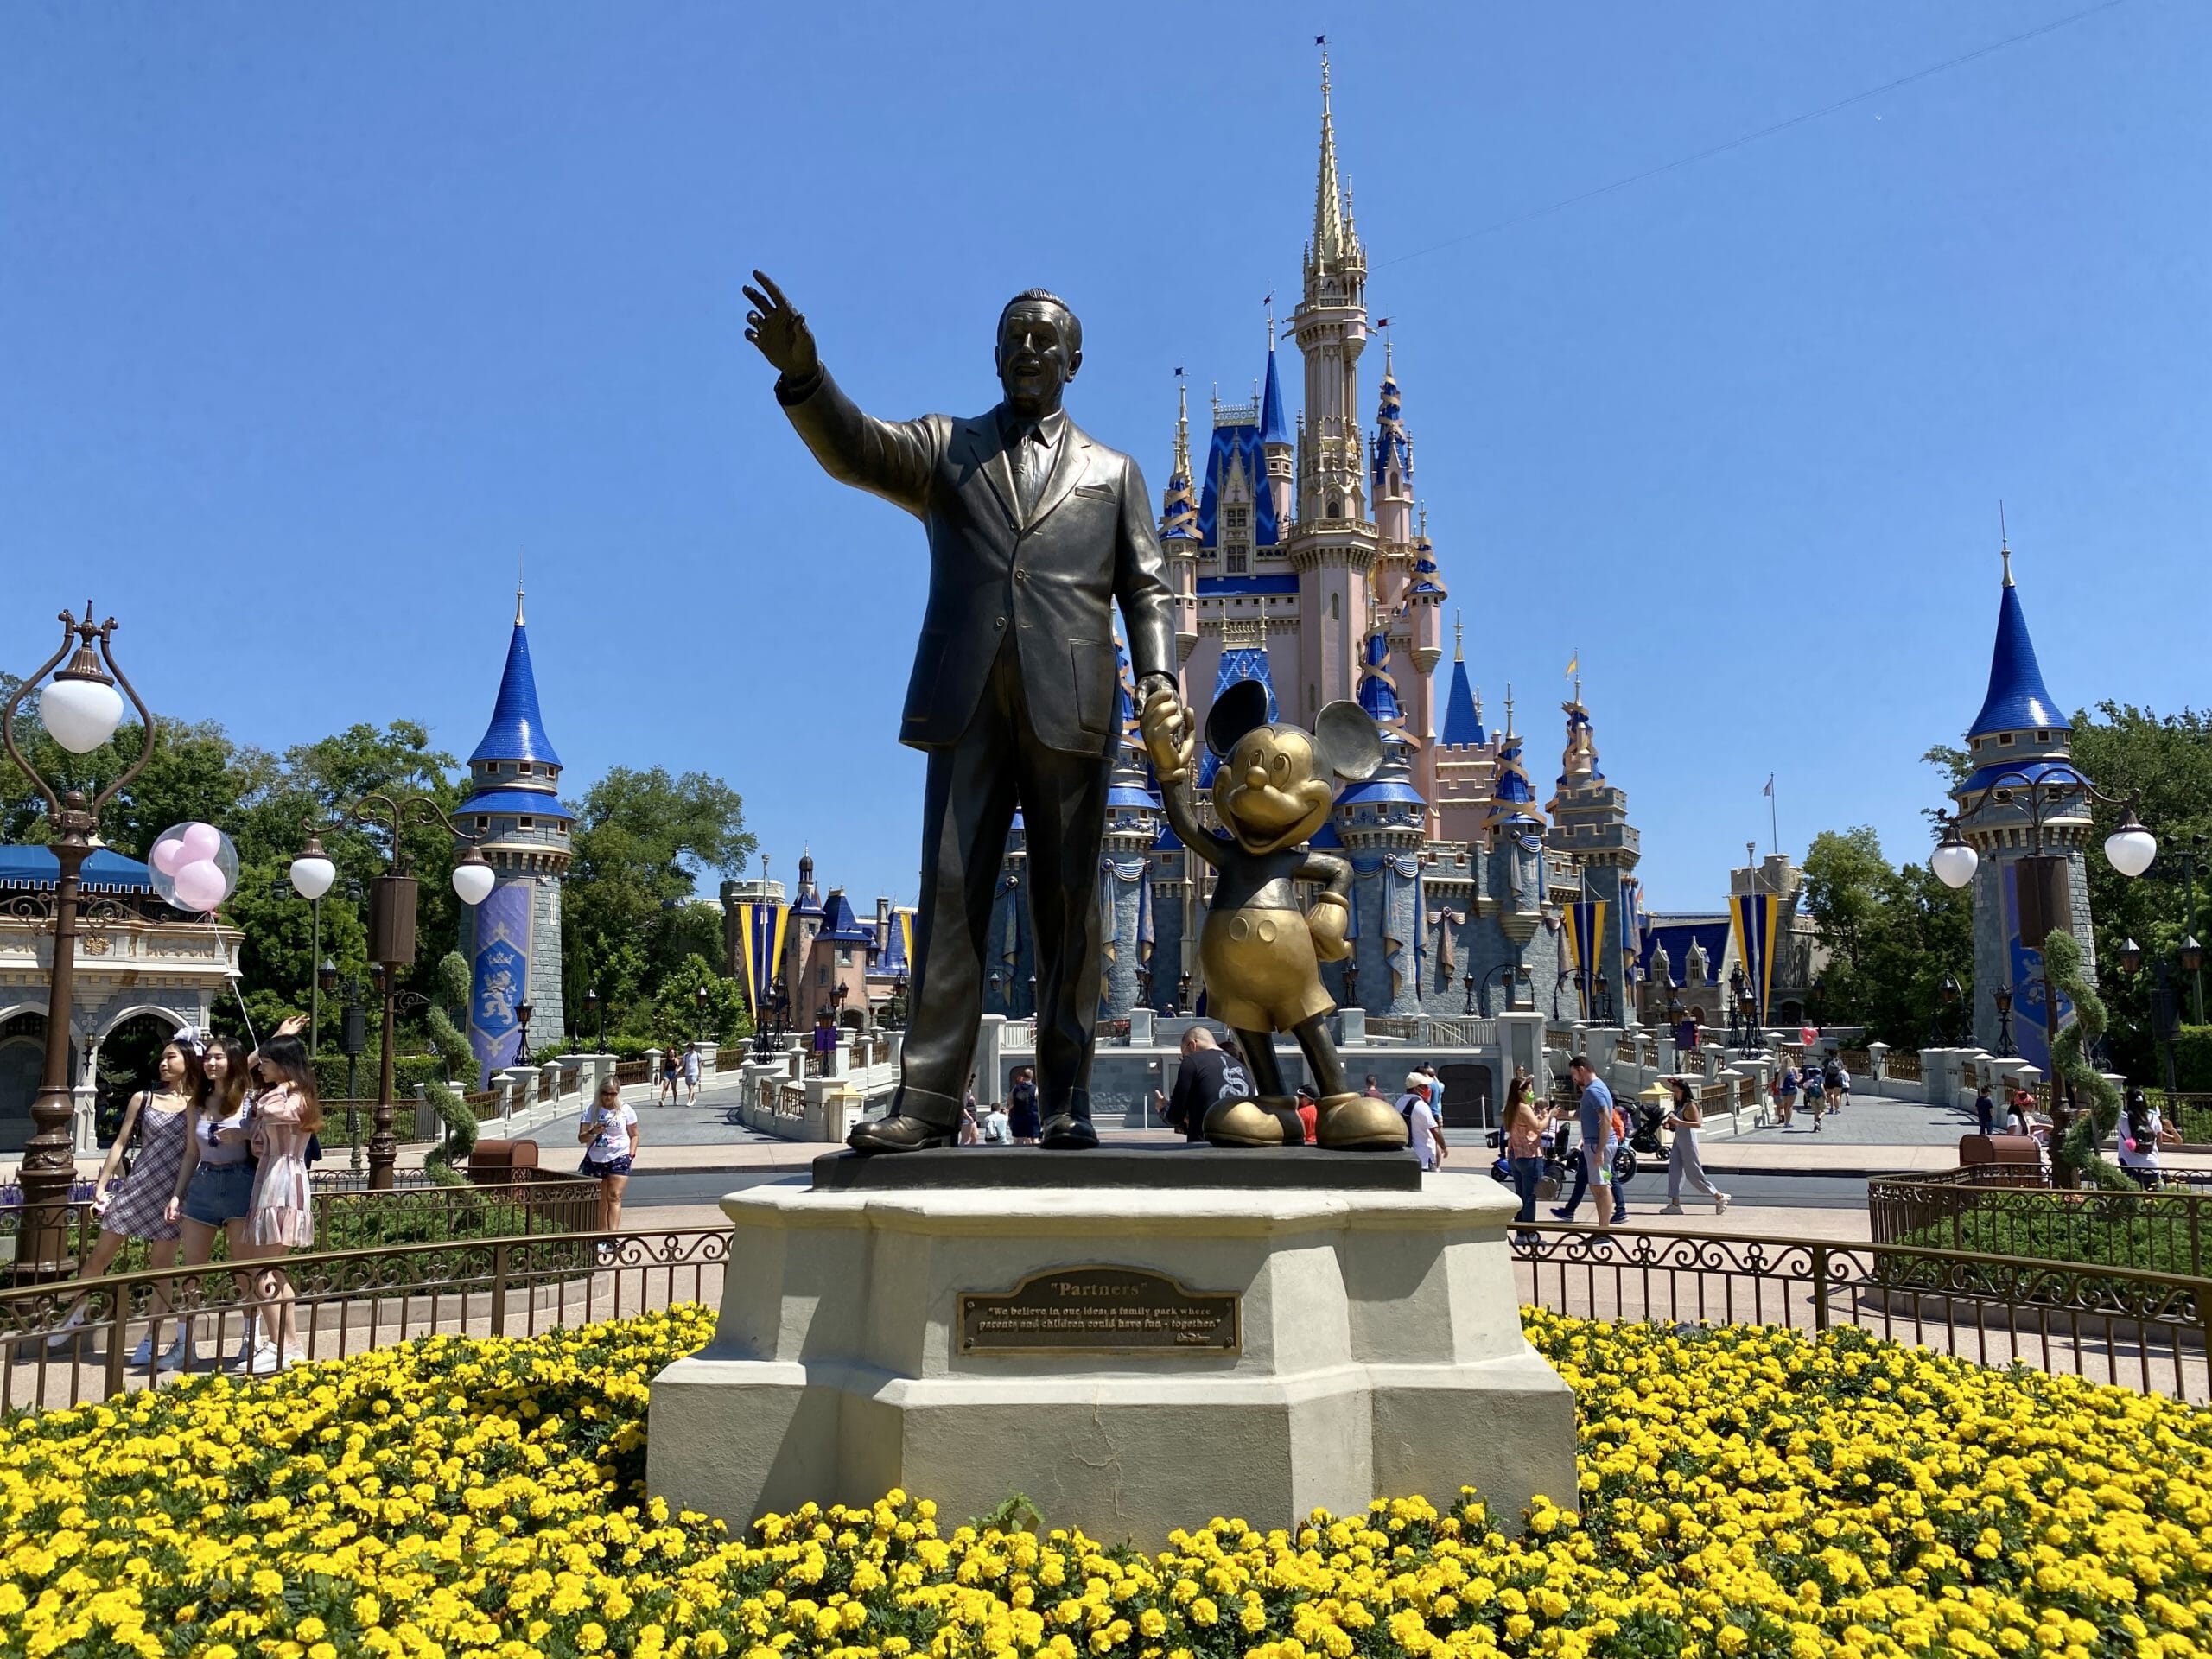 U.S. Travel Association, Including Disney, Urge Federal Government to Reopen International Travel - WDW News Today